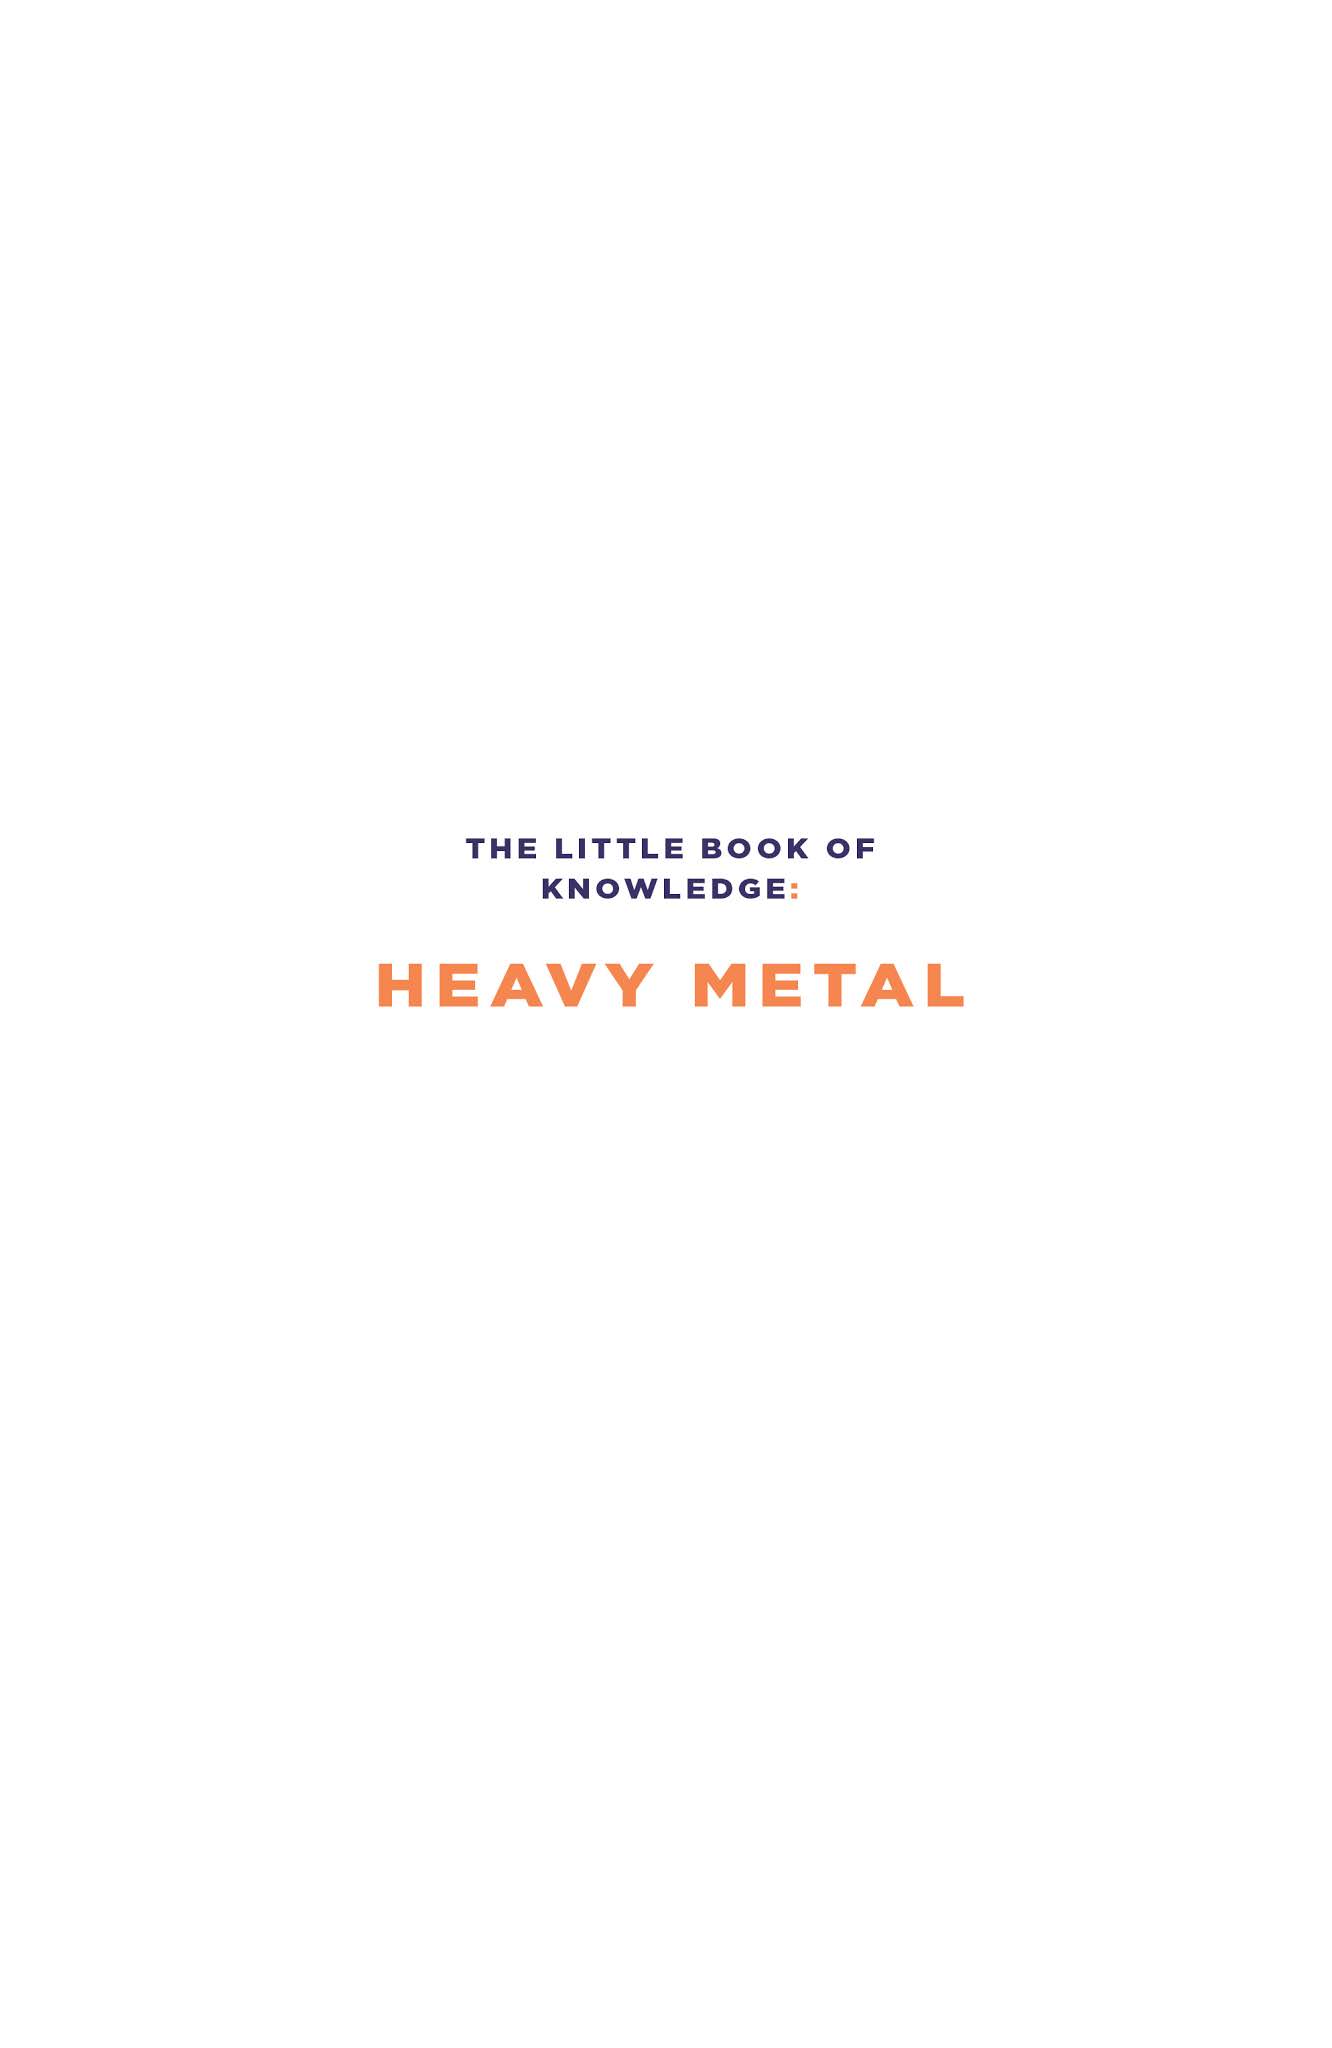 Read online The Little Book of Knowledge: Heavy Metal comic -  Issue # TPB - 3